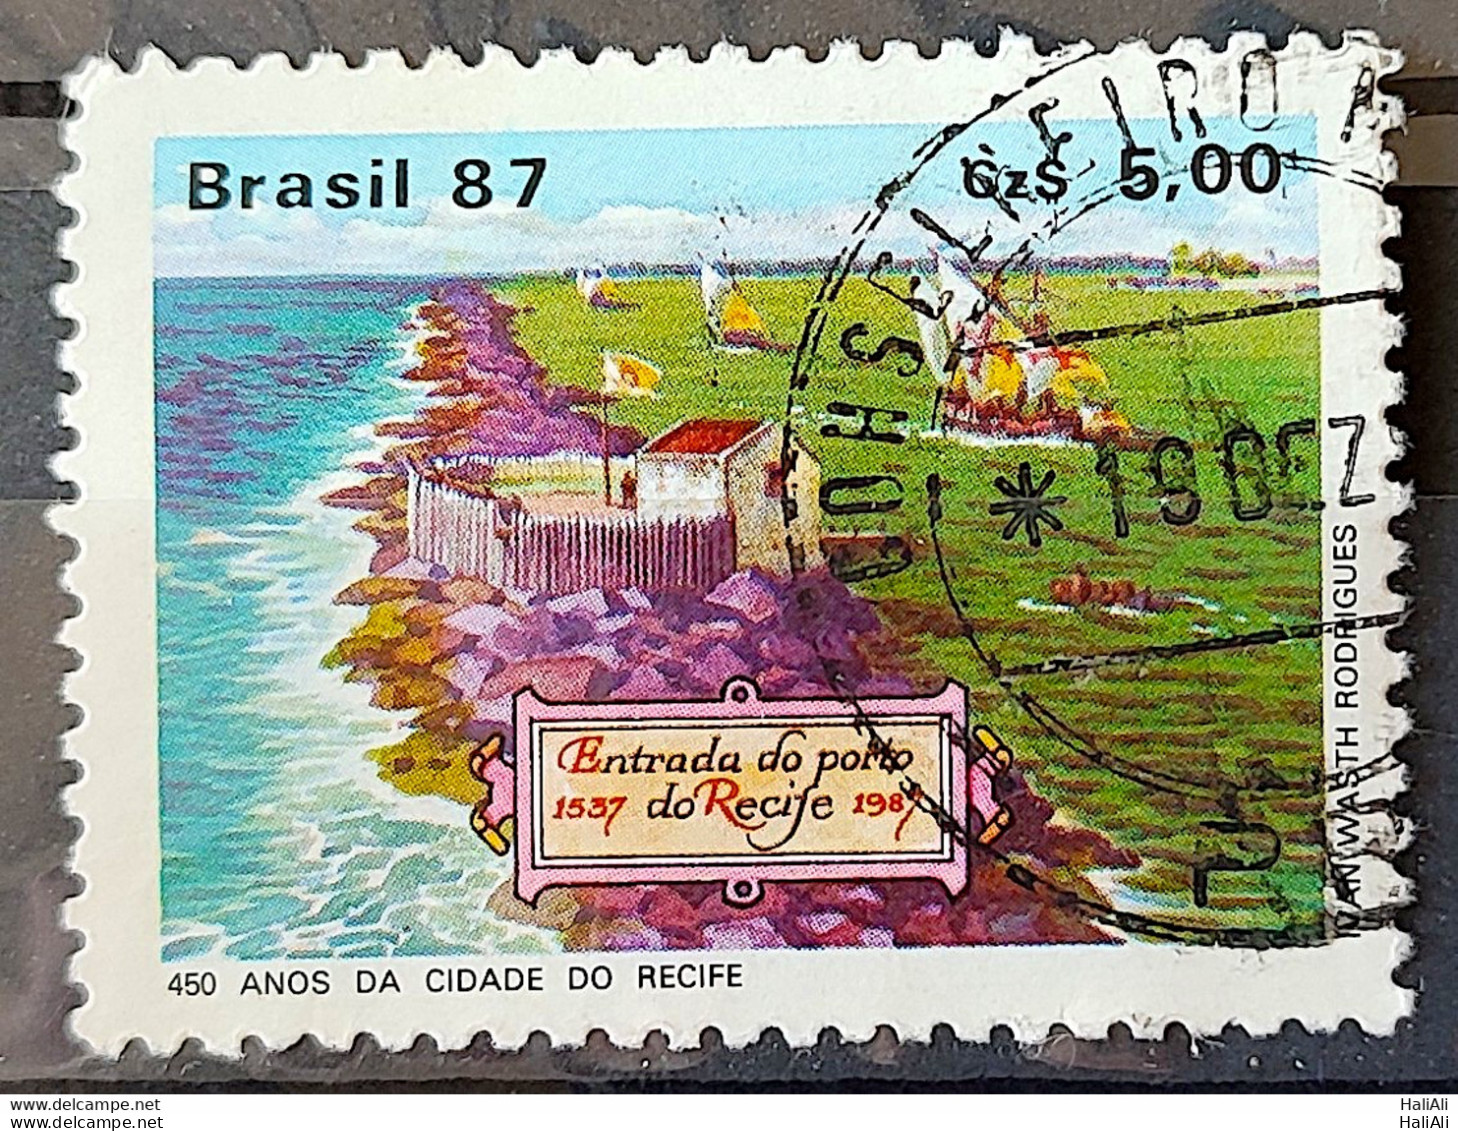 C 1565 Brazil Stamp 450 Year City Of Recife Pernambuco 1987 Circulated 1 - Used Stamps